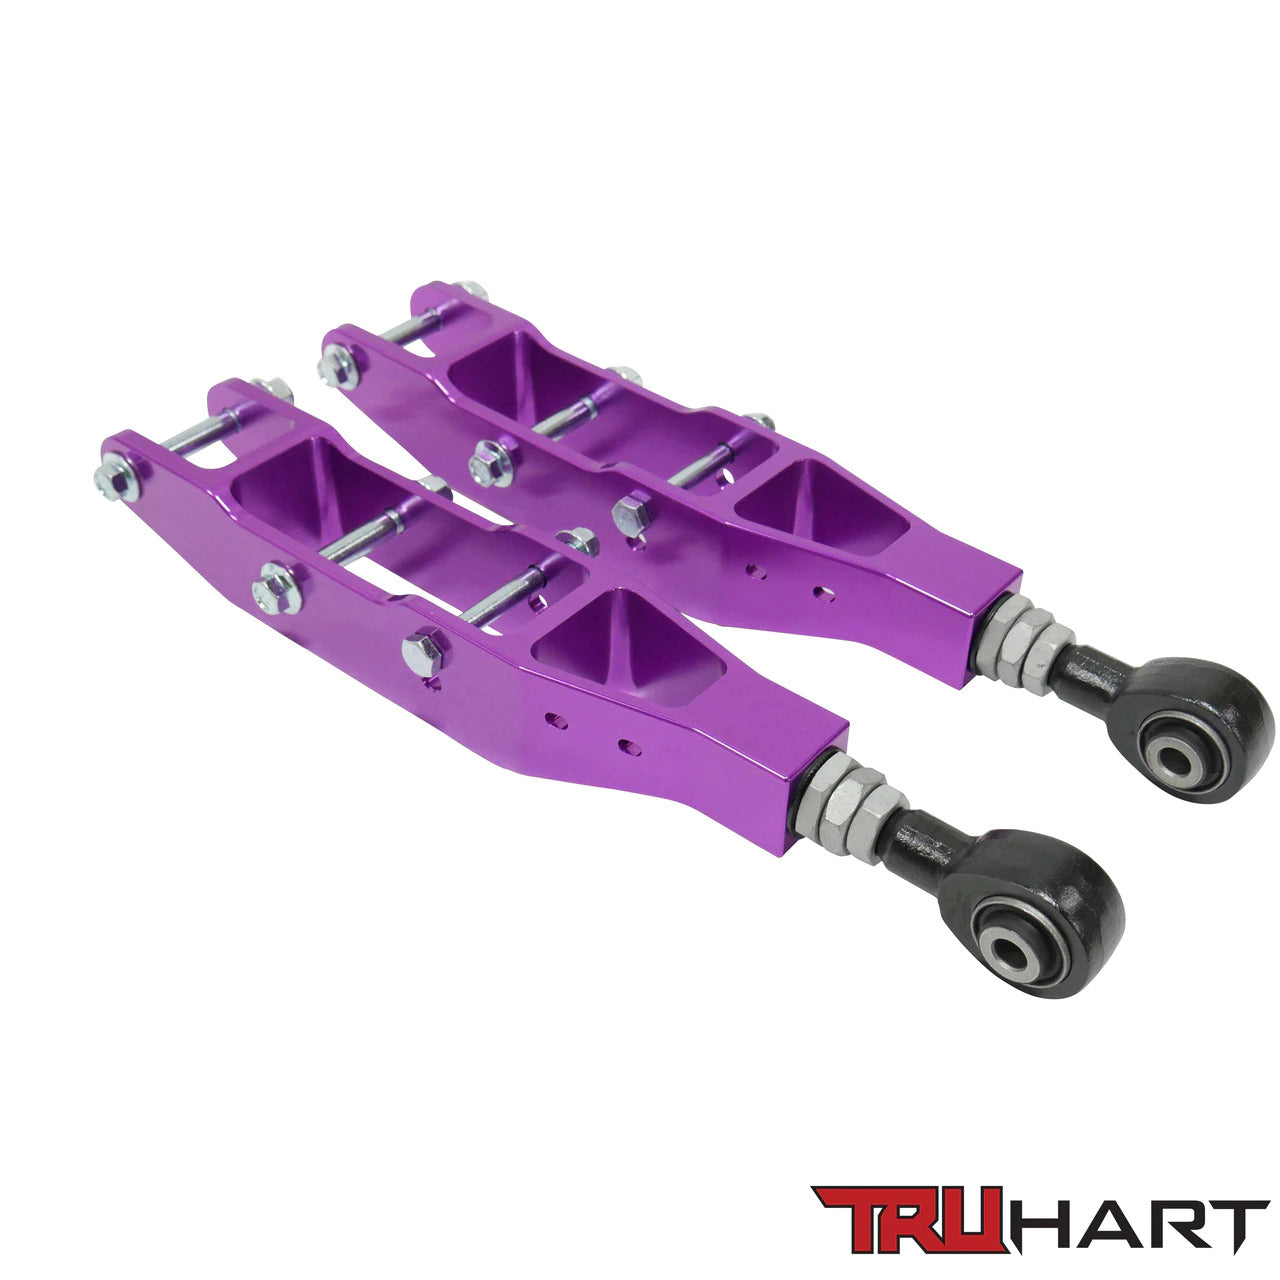 TruHart - Rear Lower Control Arms - Adjustable - Anodized Purple - TH-S108-PU